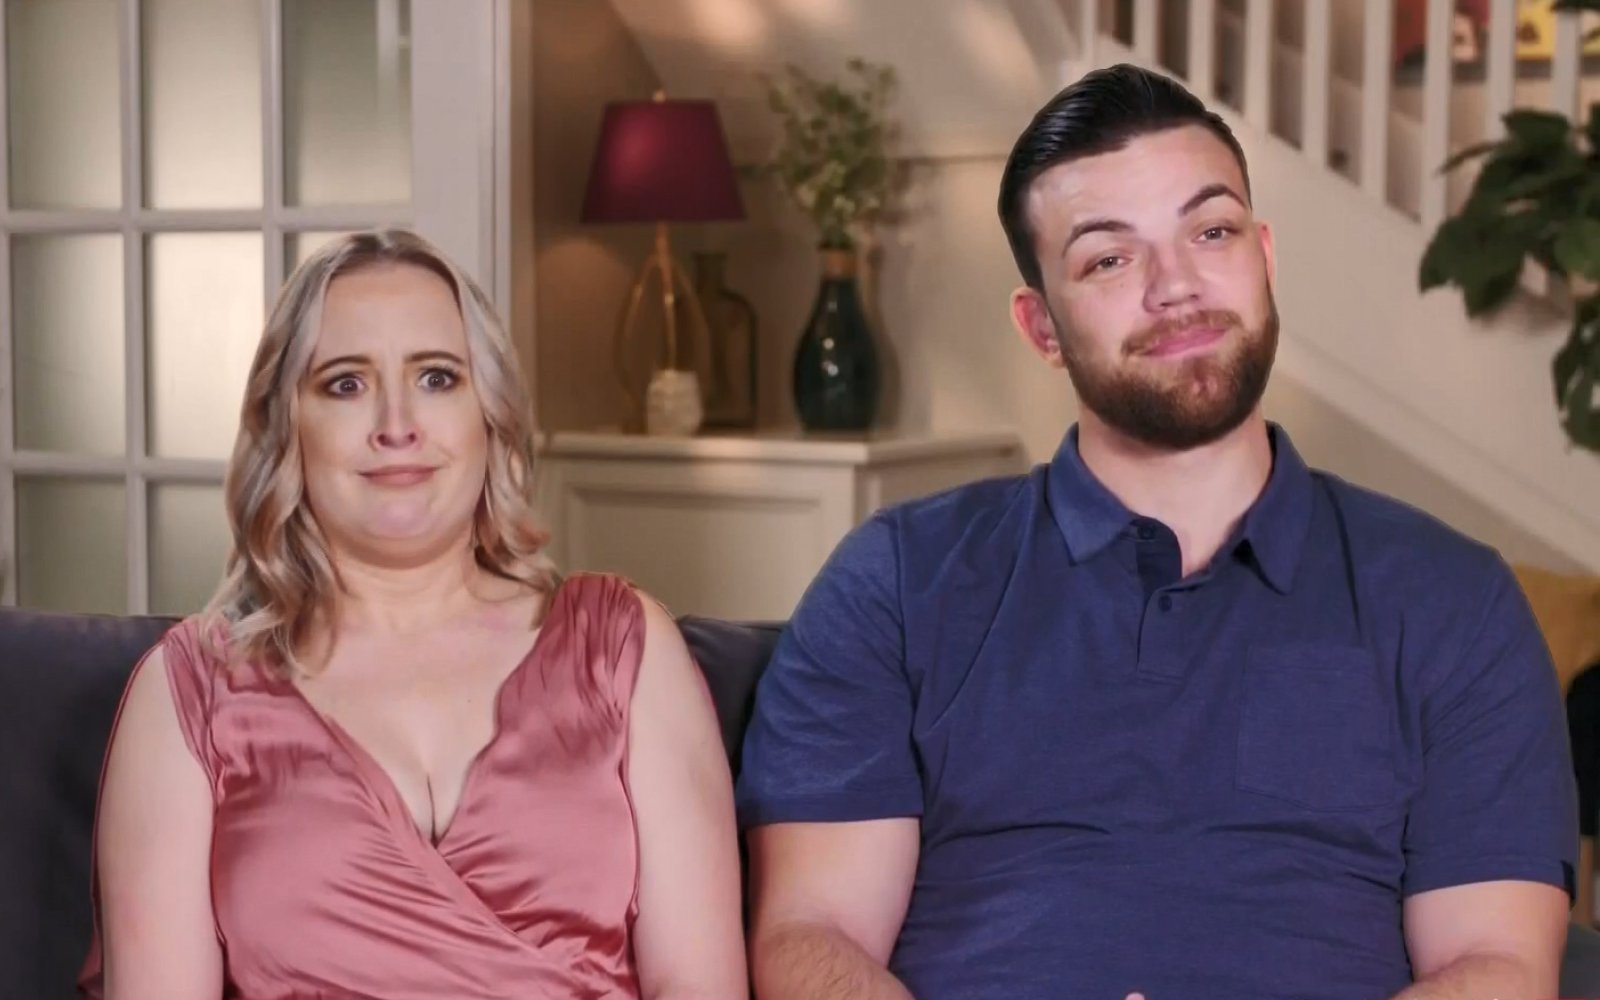 90 Day Fiance Spoilers Are Andrei Castravet And Elizabeth Potthast